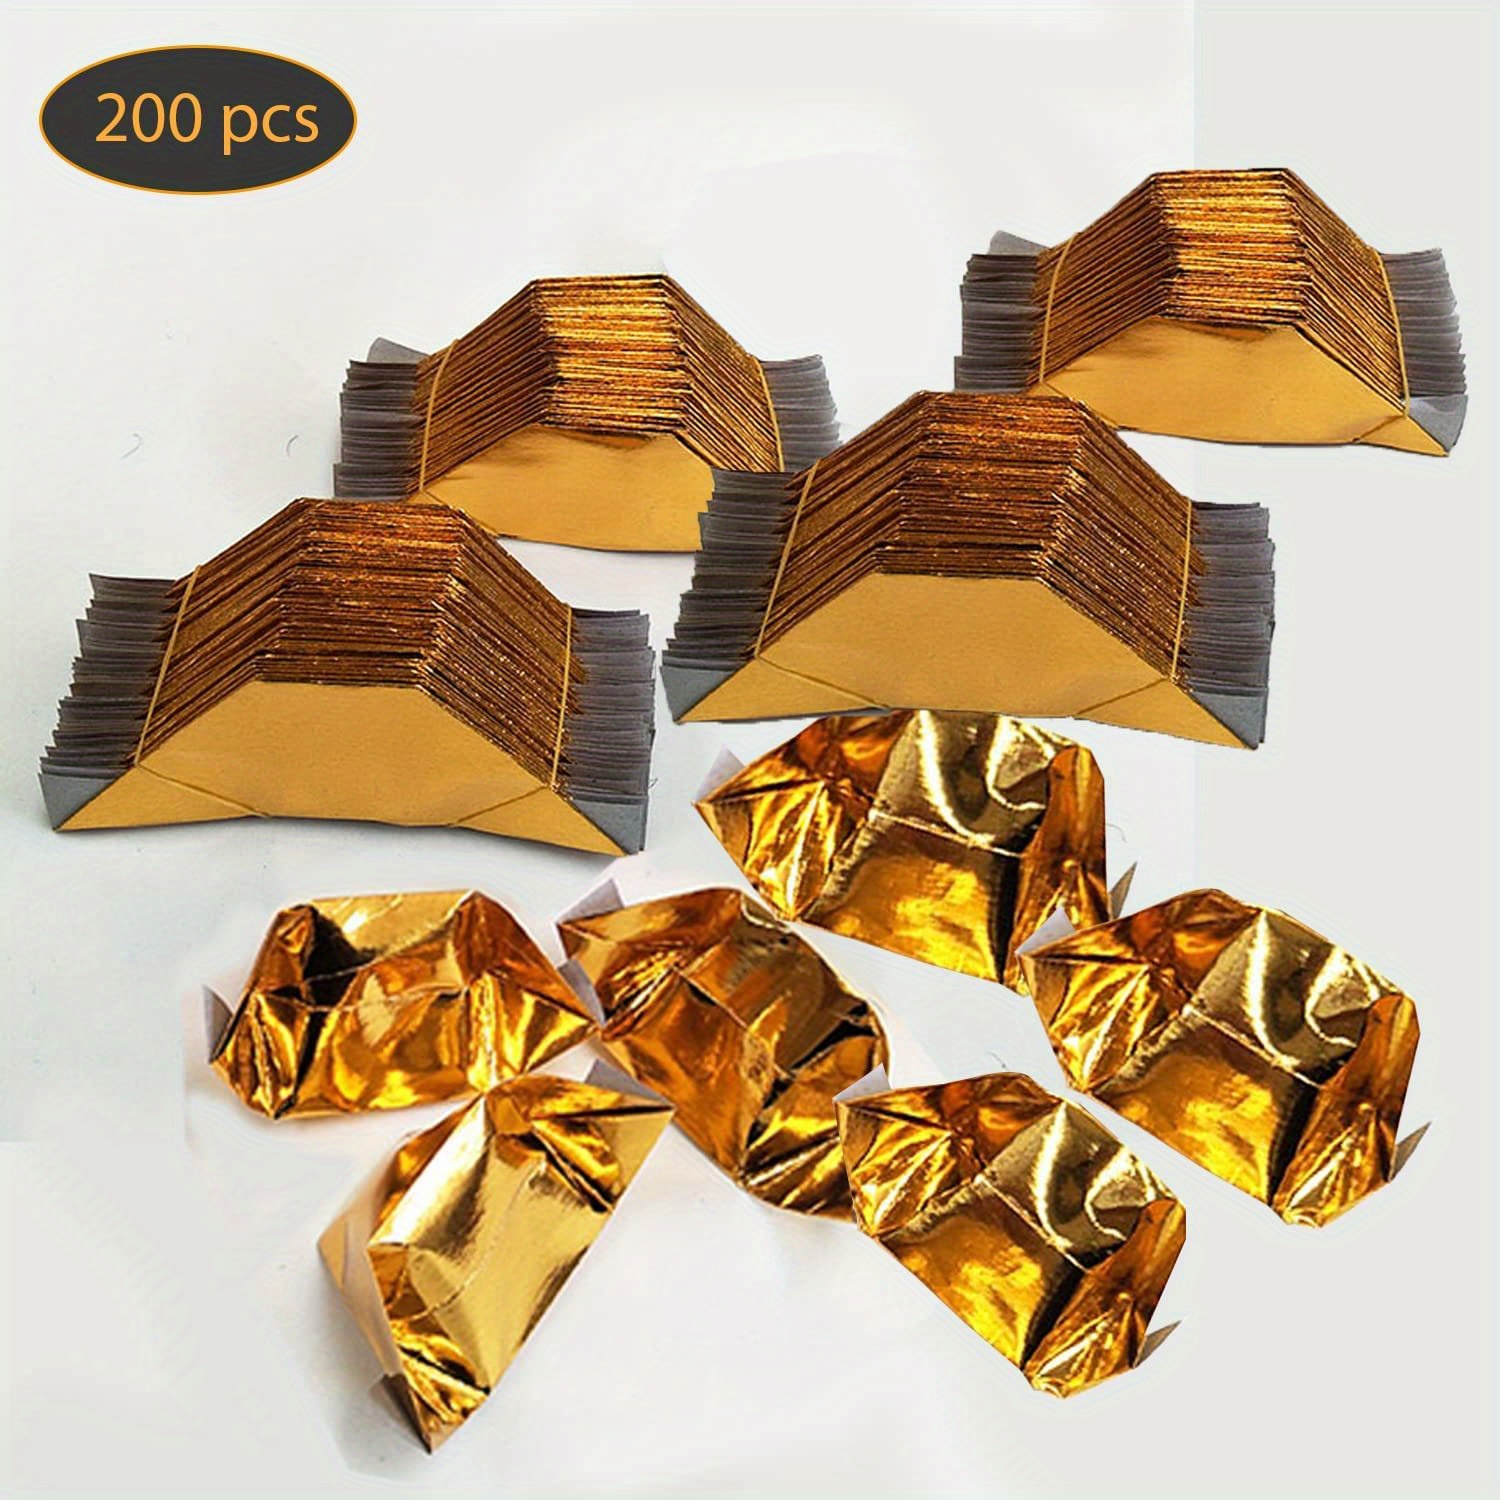 200pcs Chinese Joss Paper Folding Gold Ingot, Sacrificial Supplies For  Deceased Family,Burn Completely